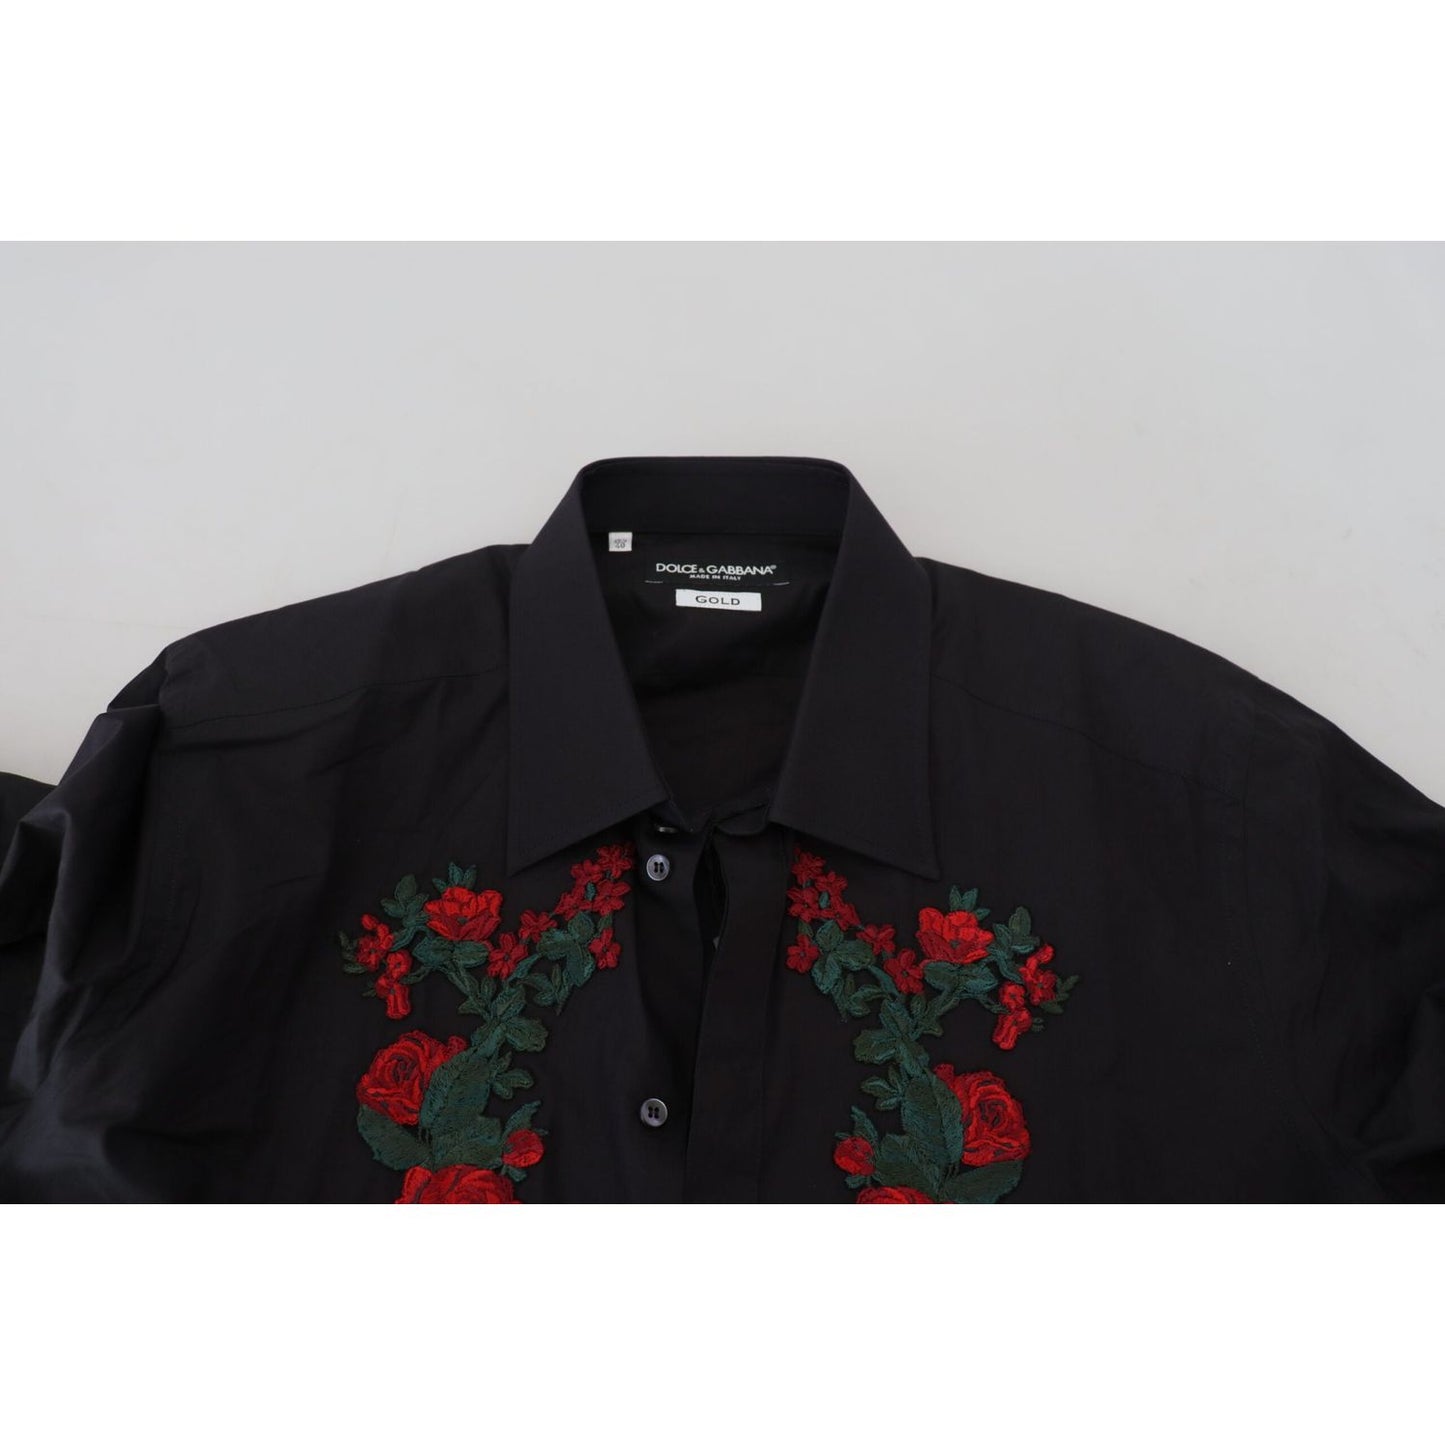 Dolce & Gabbana Elegant Floral Embroidered Cotton Shirt black-floral-embroidery-men-long-sleeves-gold-shirt IMG_6992-scaled-0640b191-a61.jpg